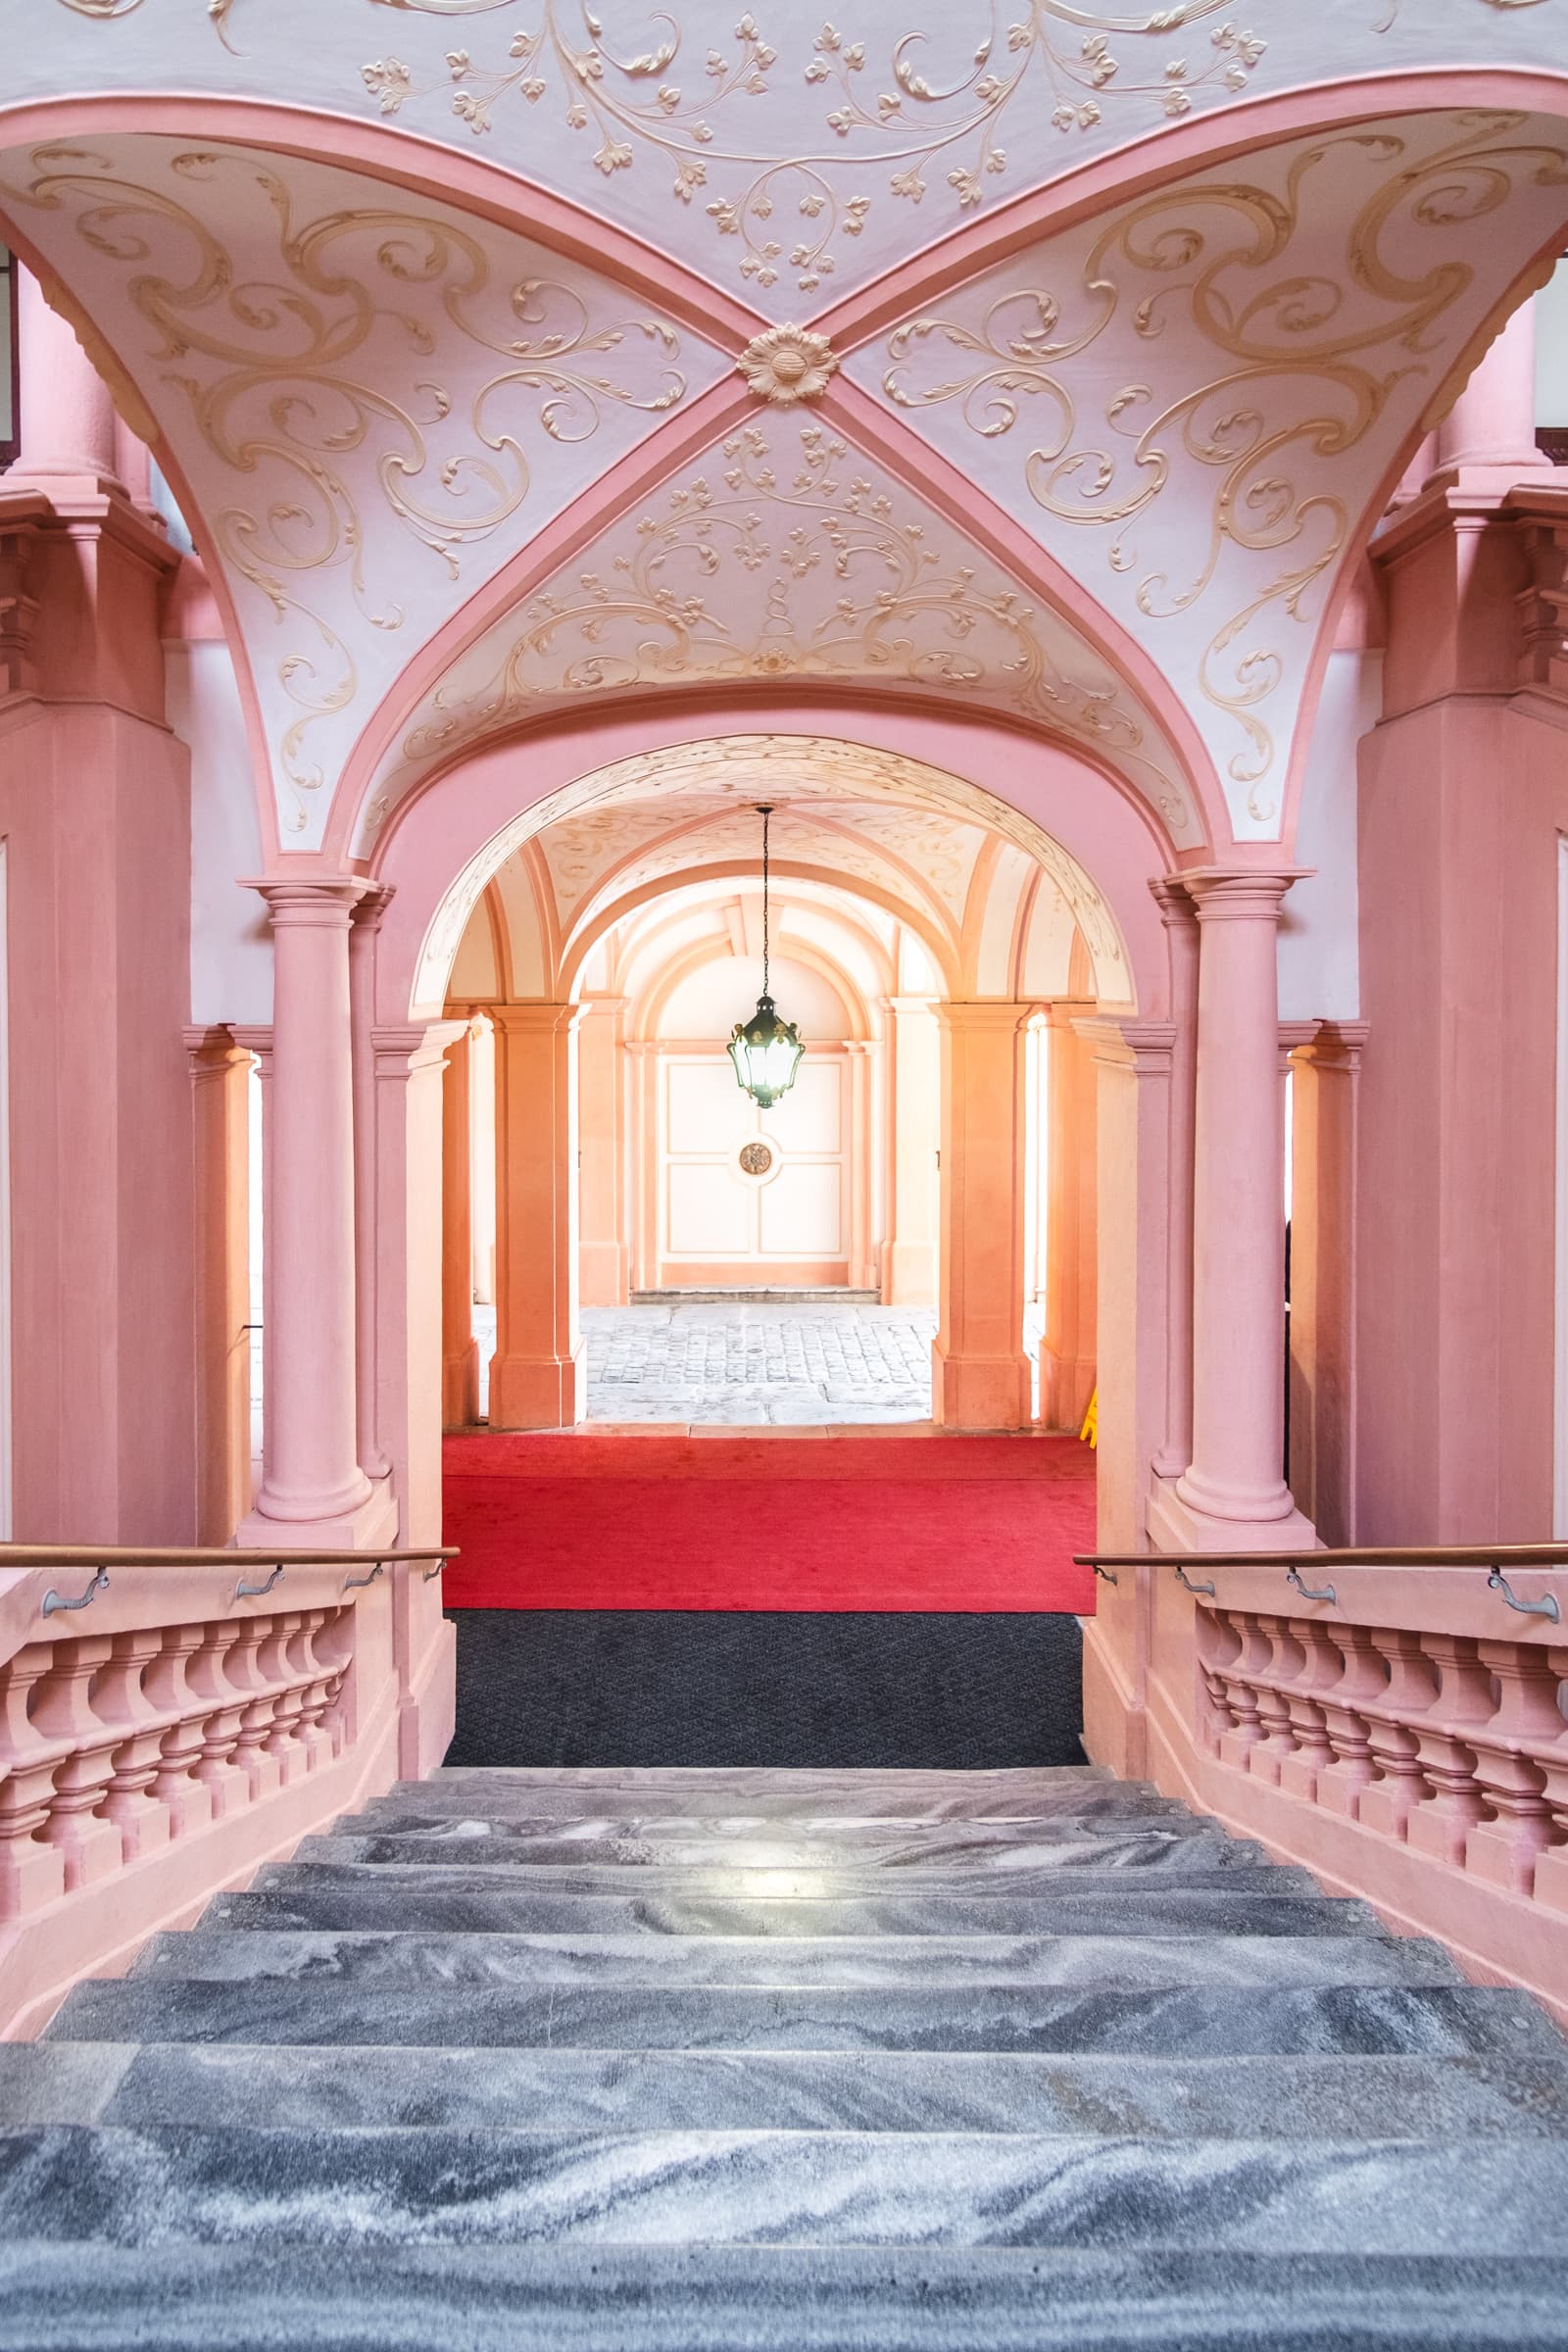 Pink staircase and passage inside Melk Abbey, Austria